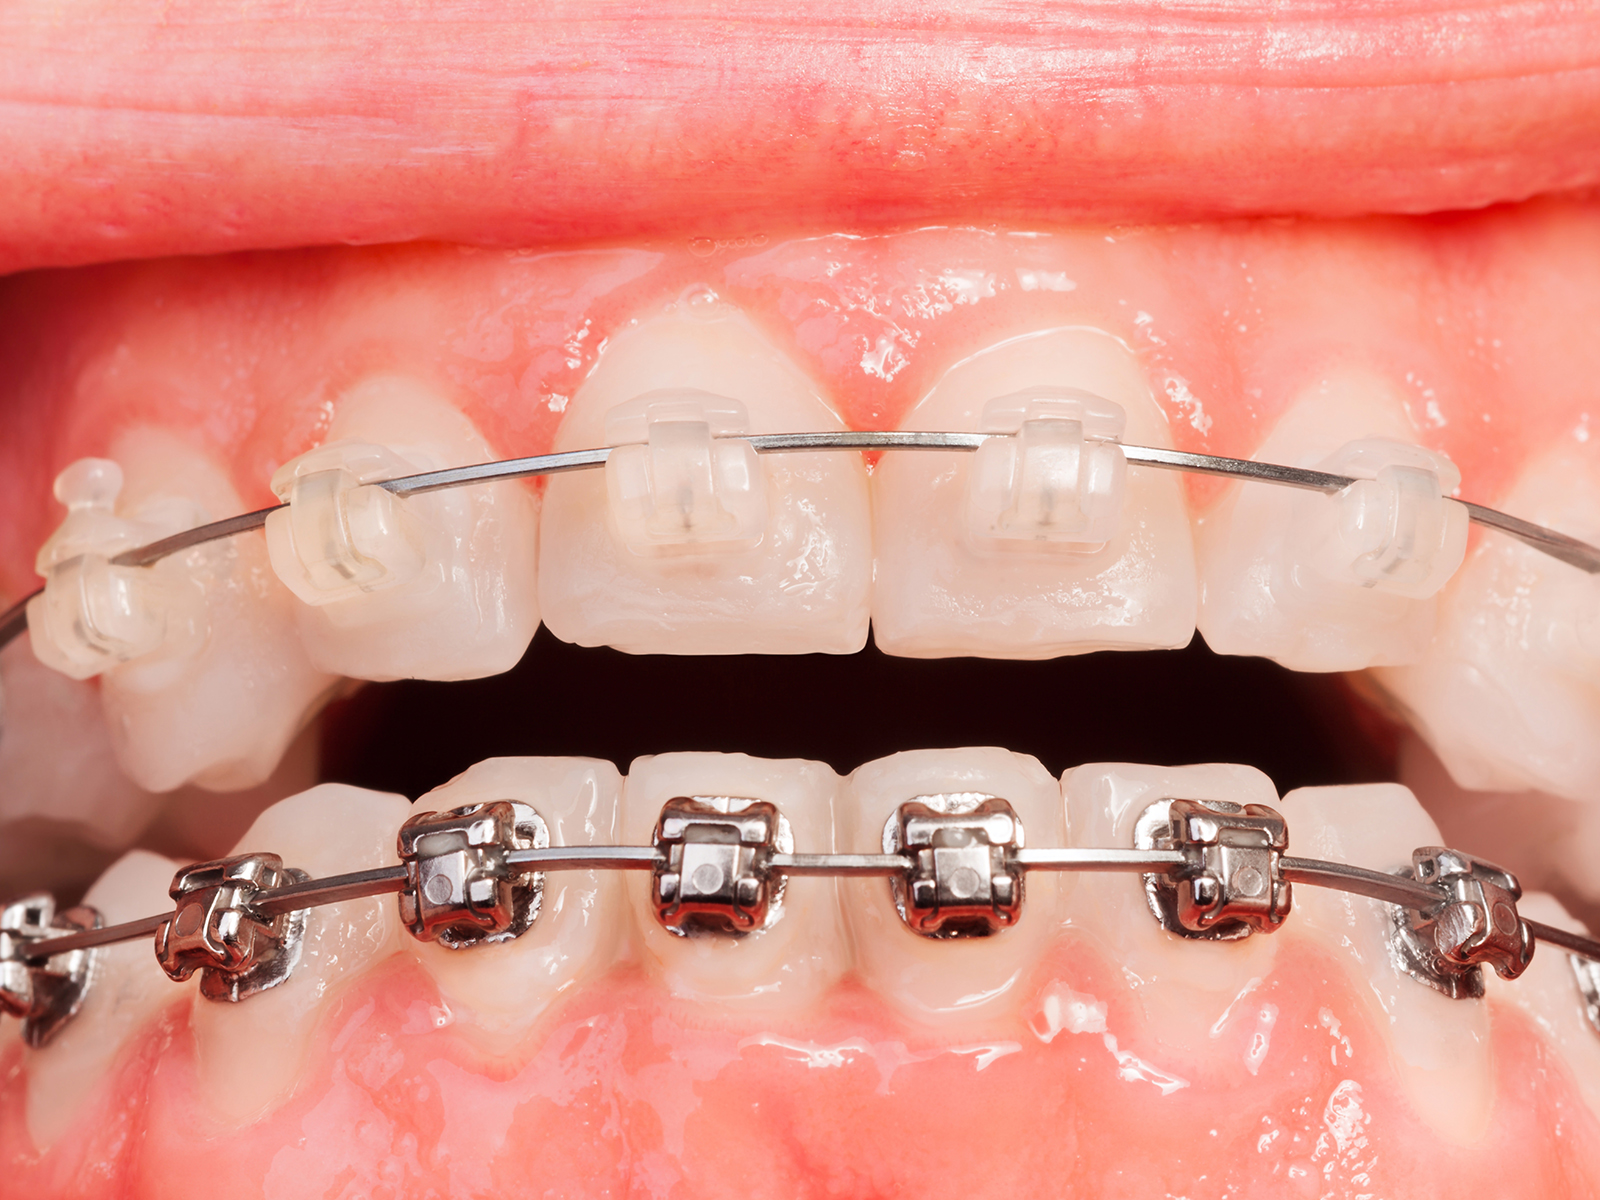 Braces: Which is Better: Metal Braces or Ceramic Braces